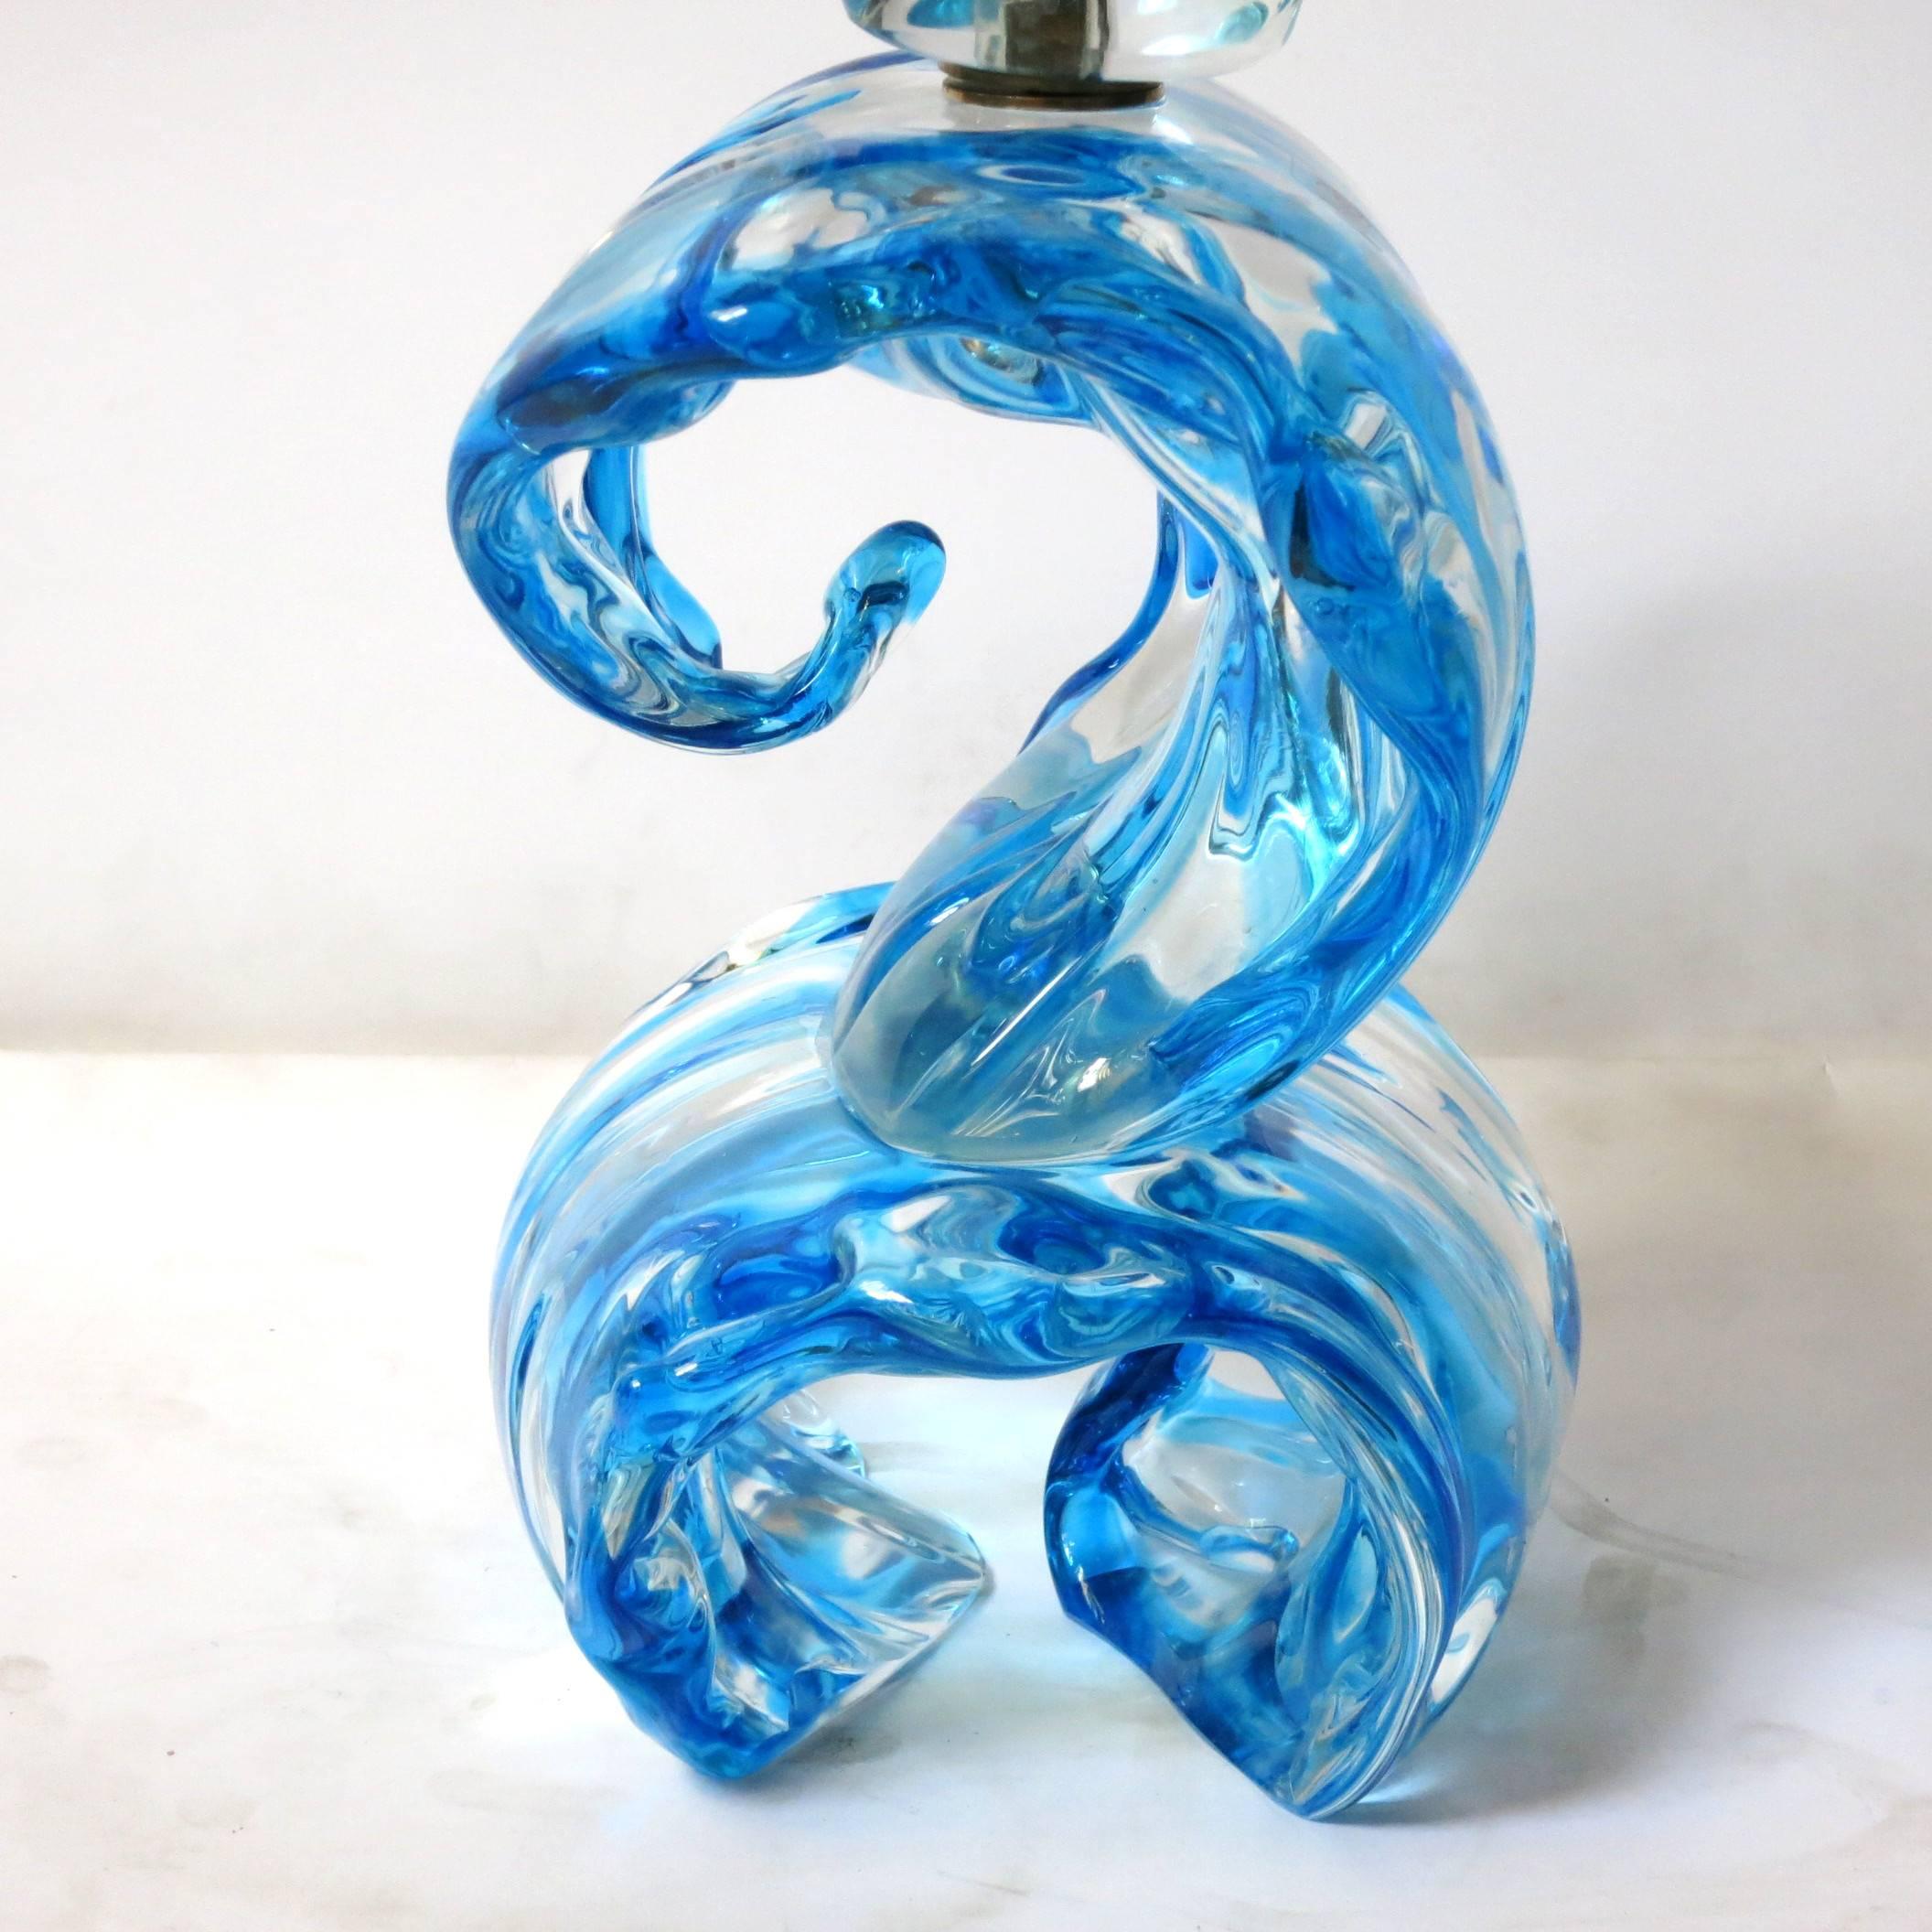 Dolphin on Wave Murano Glass Sculpture by Sergio Costantini im Zustand „Hervorragend“ in Los Angeles, CA